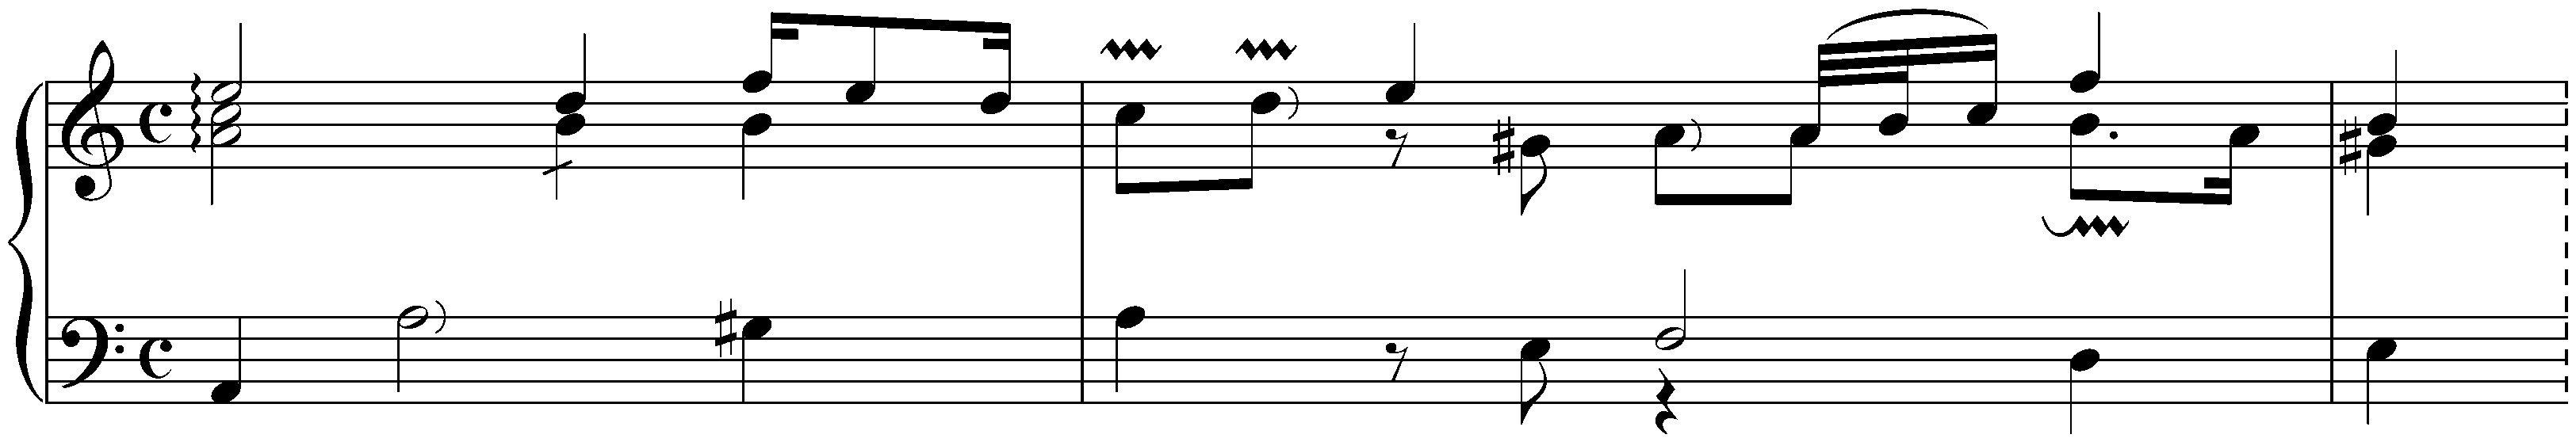 Nine little Preludes from the Notebook for Wilhelm Friedemann Bach, BWV 924–932; 8. A minor, BWV 931